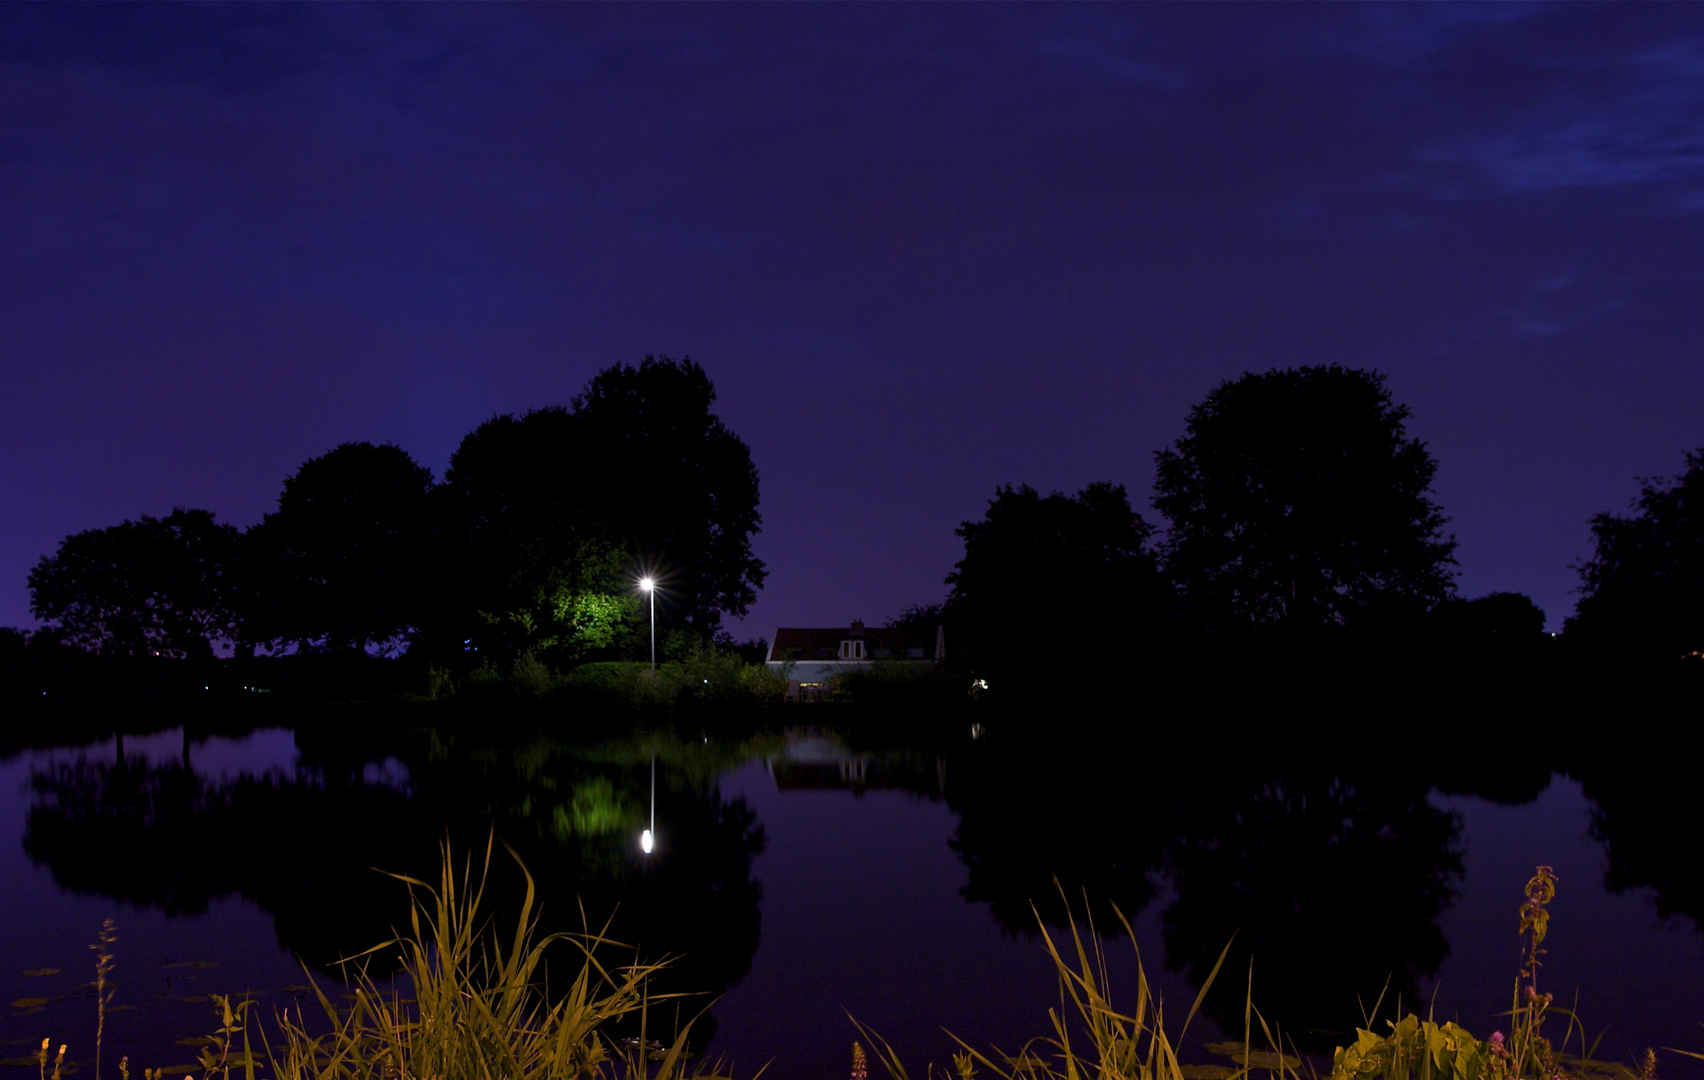 Amstel river by night